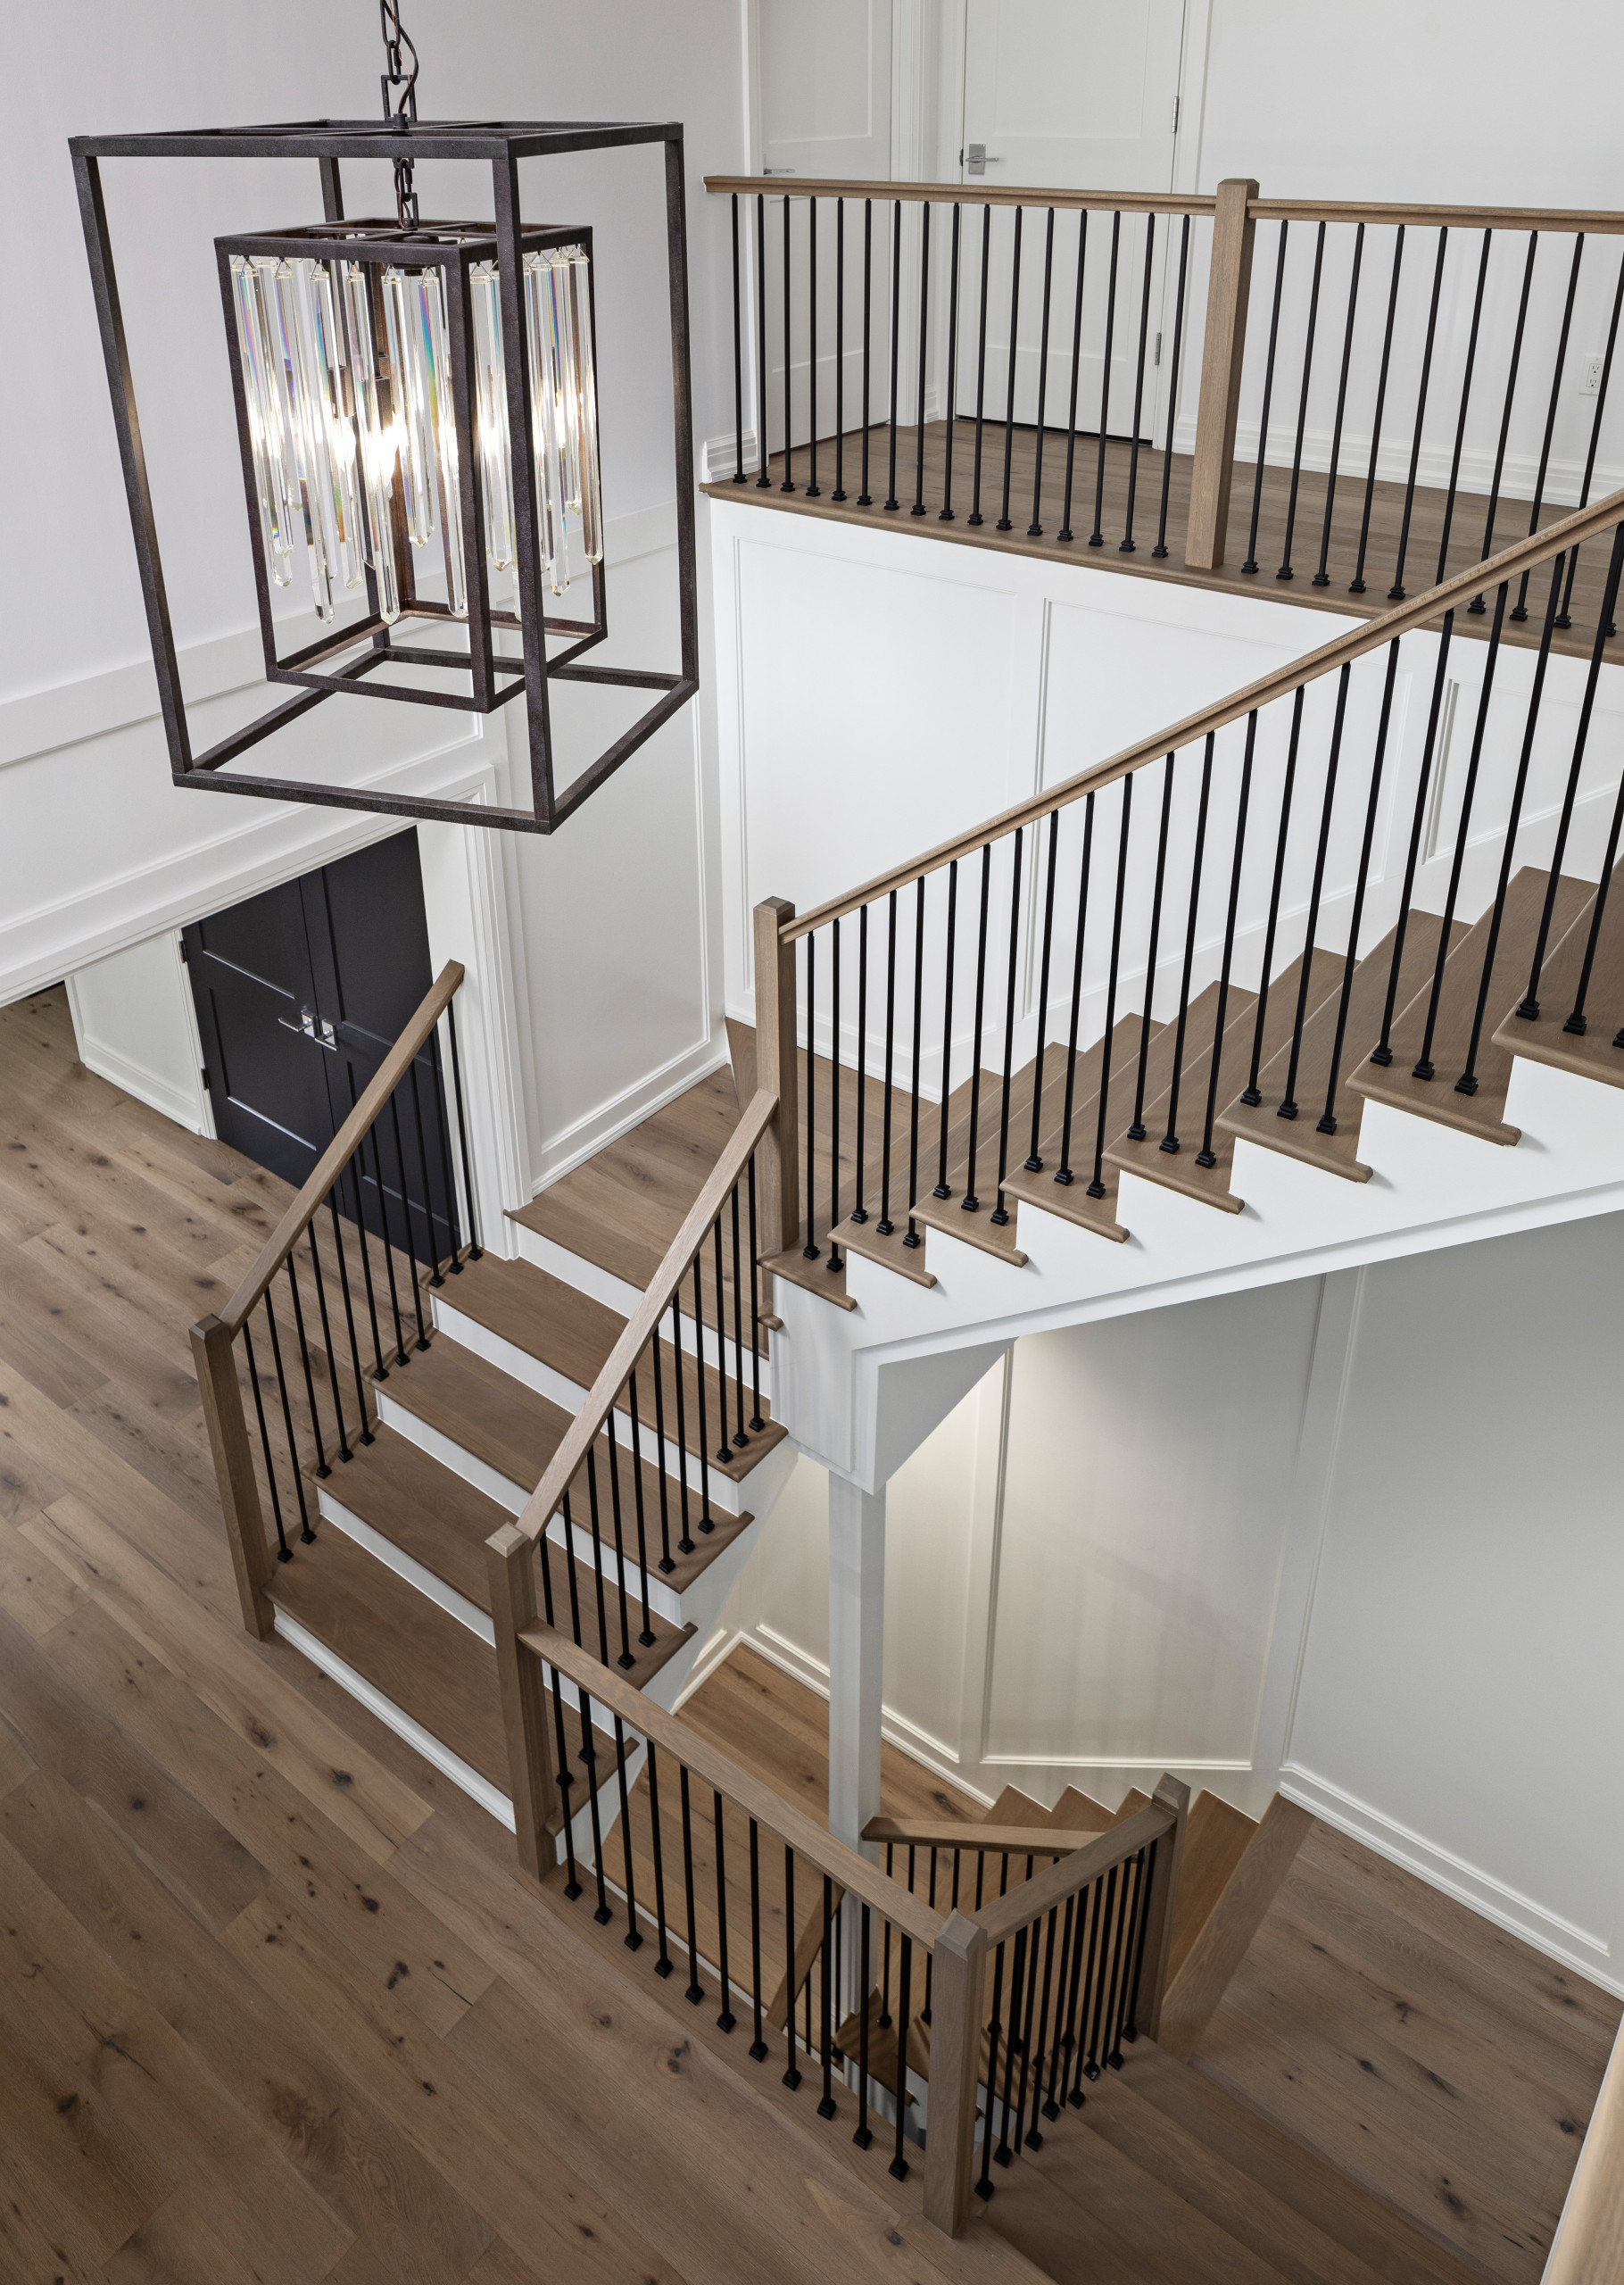 A staircase is so much more than circulation. It provides a space to create dramatic interior architecture, a place for design to carve into, where a staircase can either embrace or stand as its own d